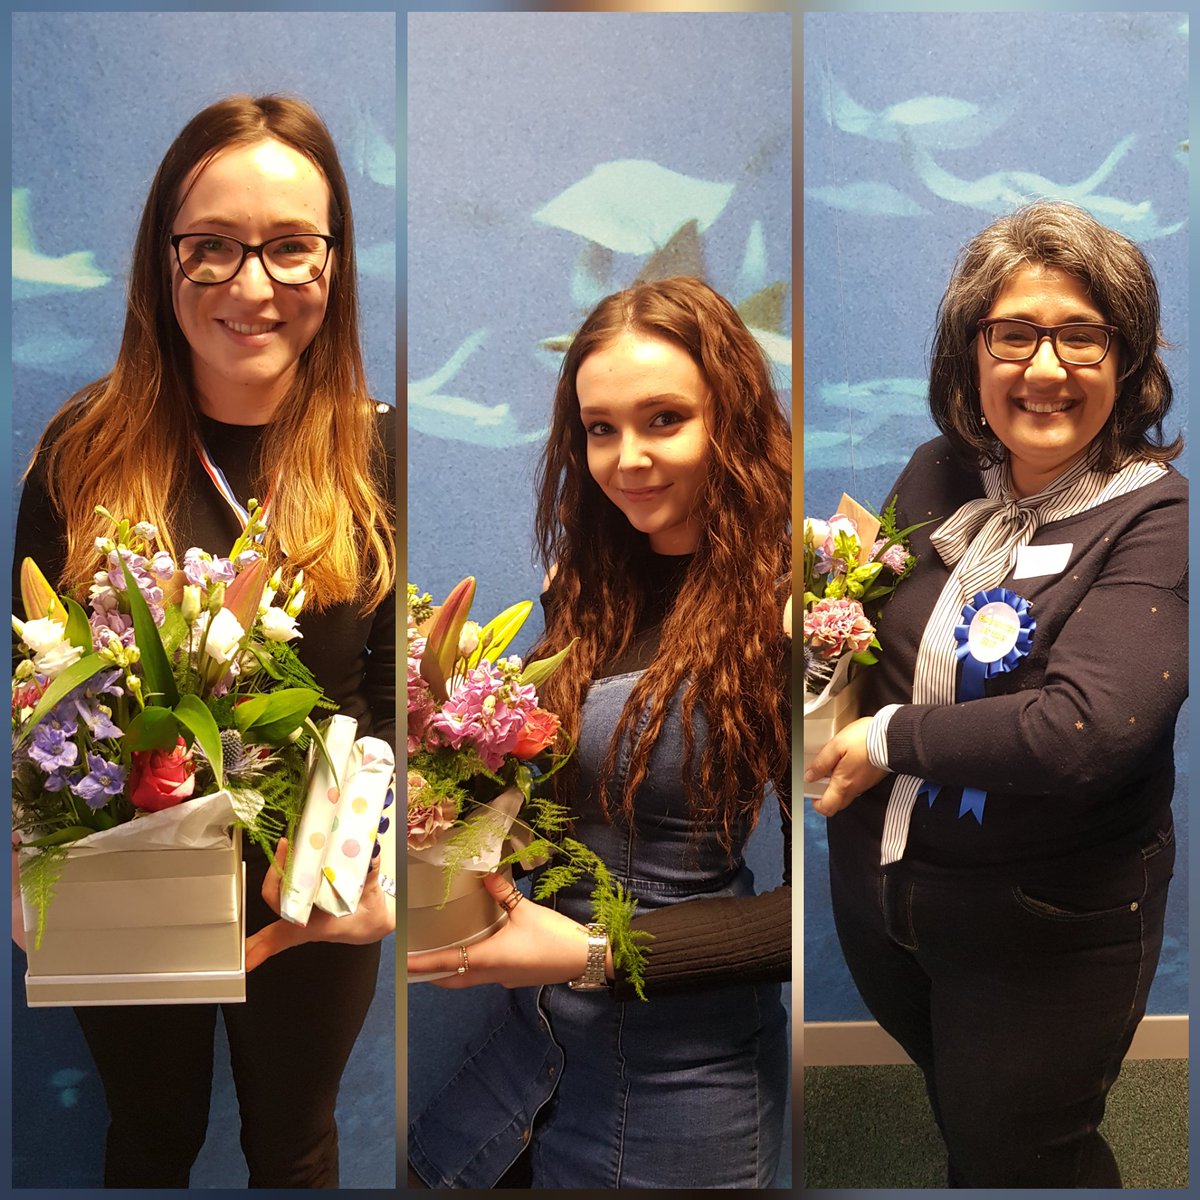 Employee of the Year - Larisa
Employee of the Day - Cristina
Thank you - Beth

So many people make JPP an amazing place to work but, today, we are #celebrating these fantastic people in particular!! 👏👏👏👏👏

#TeamJPP #amazingemployees #congratulations #thankyou